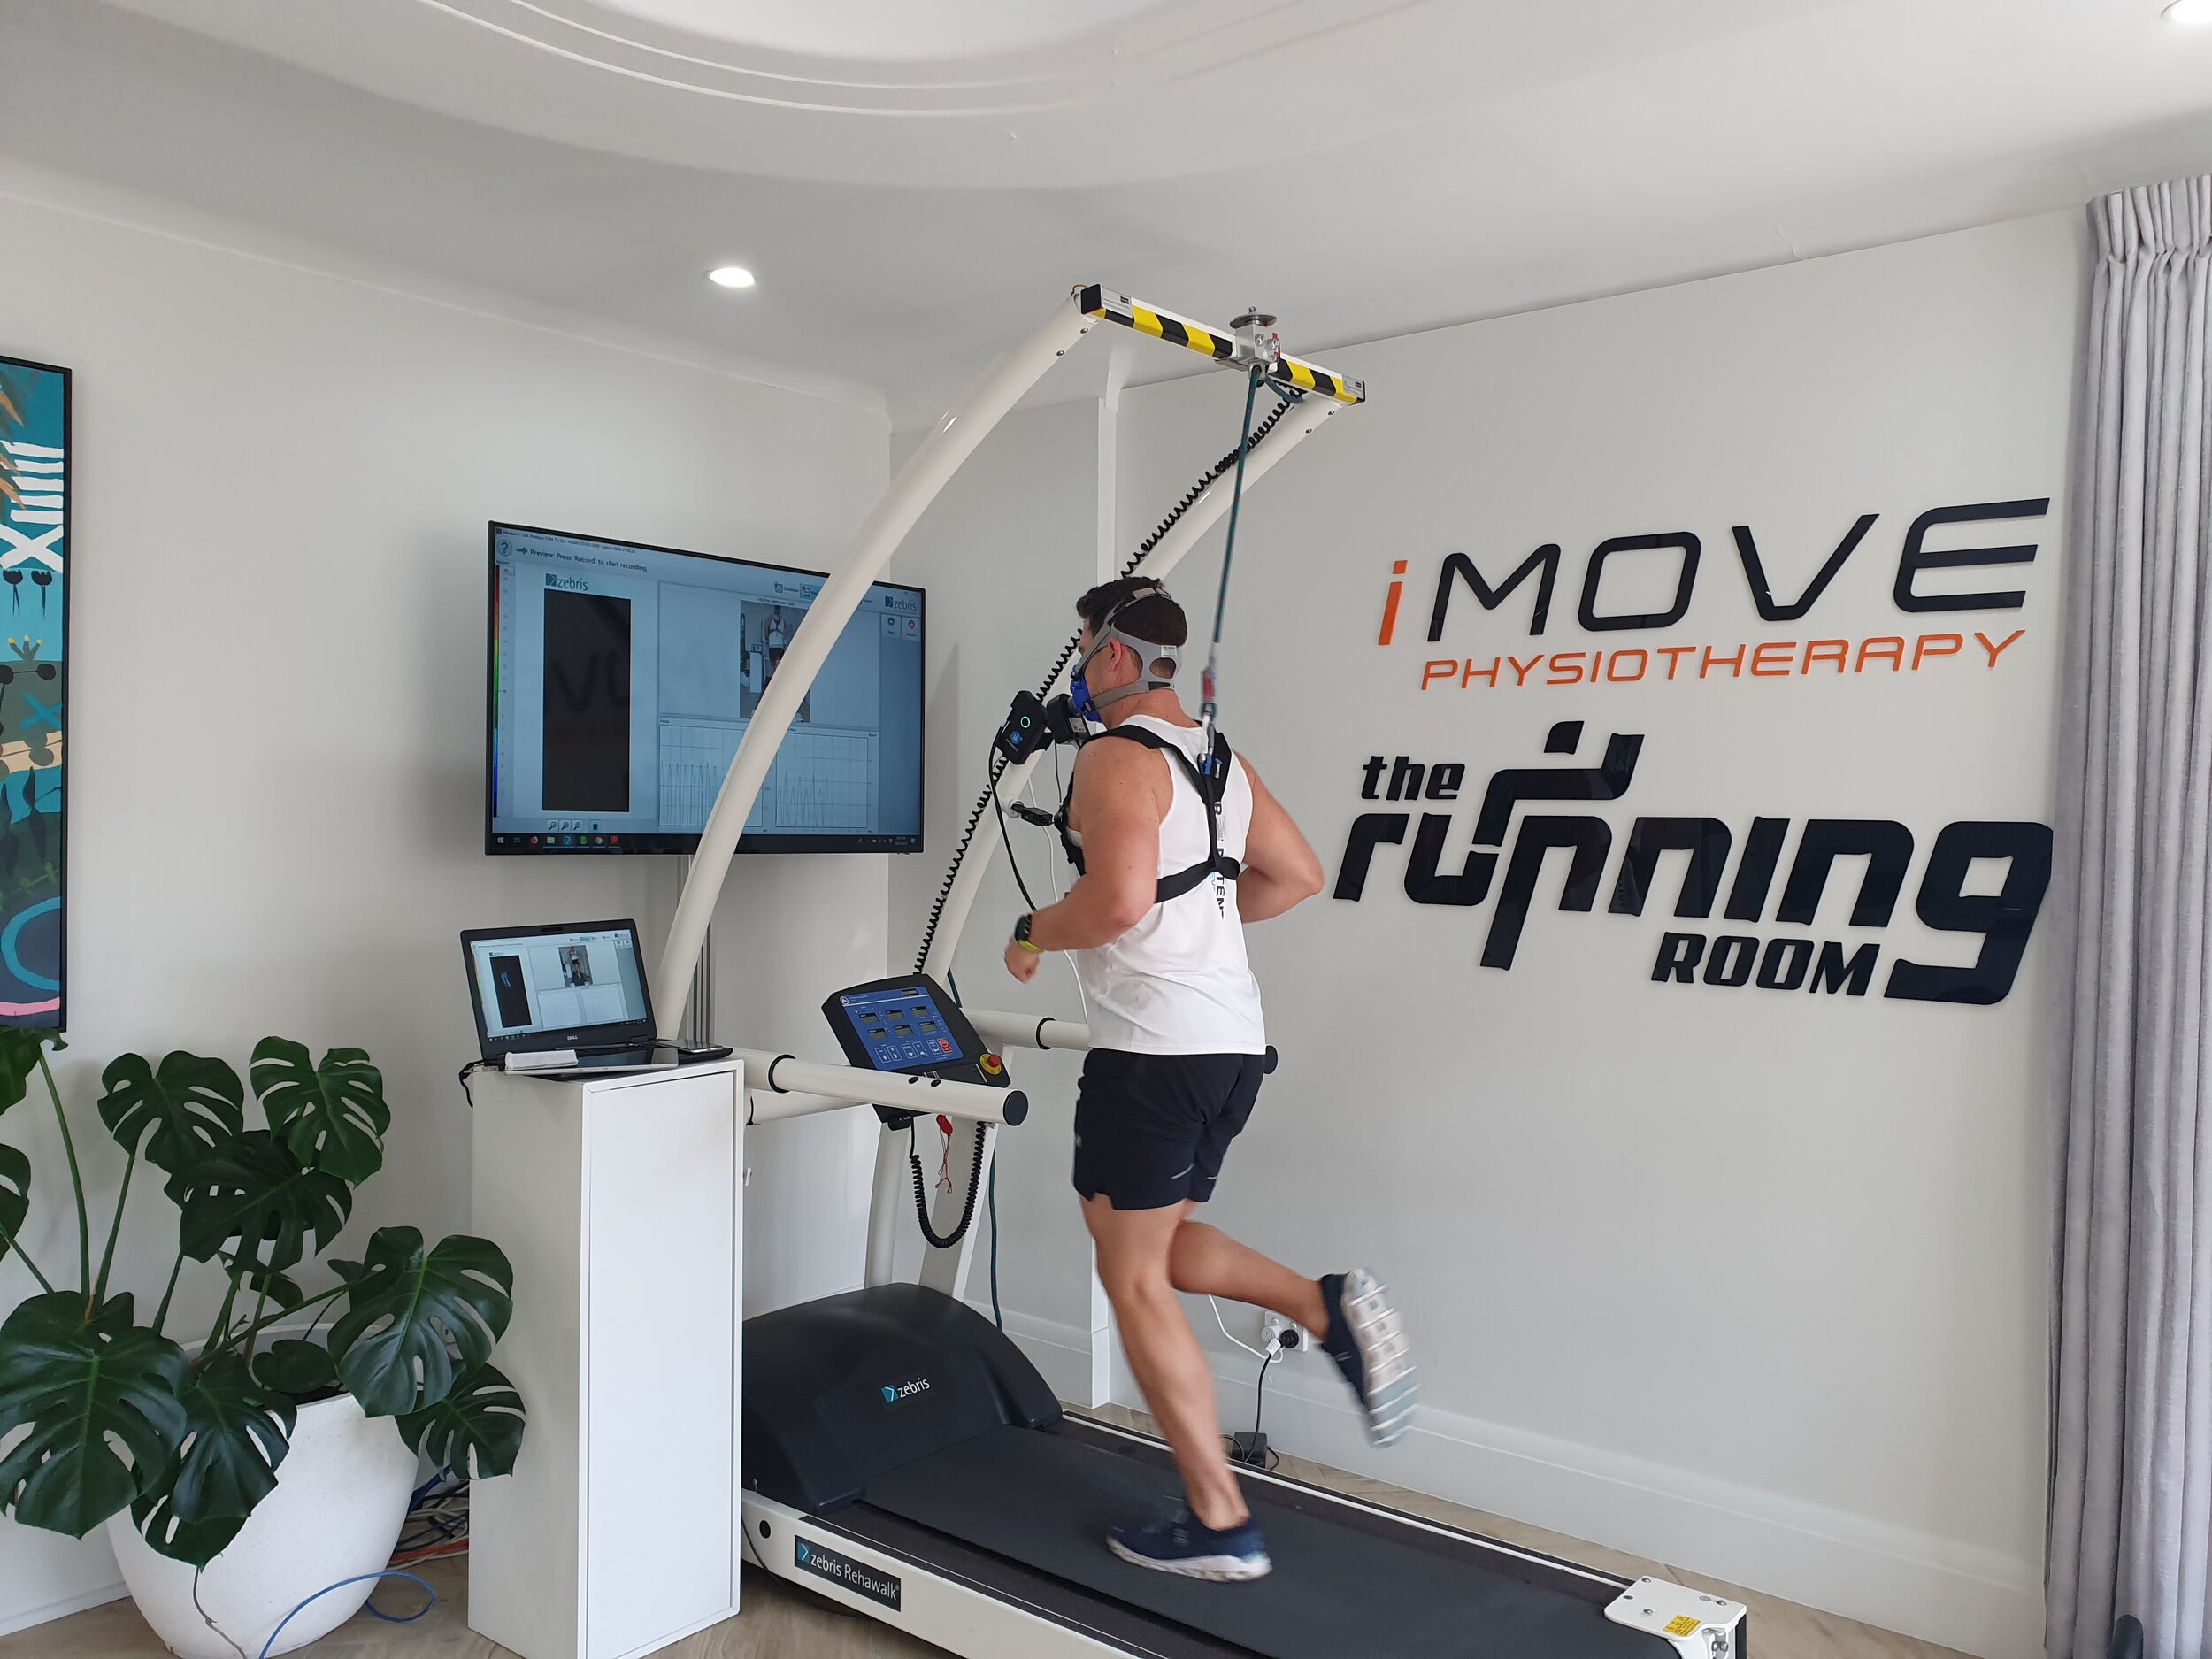 Performance Testing Vo2 Max The Running Room Physiotherapy And